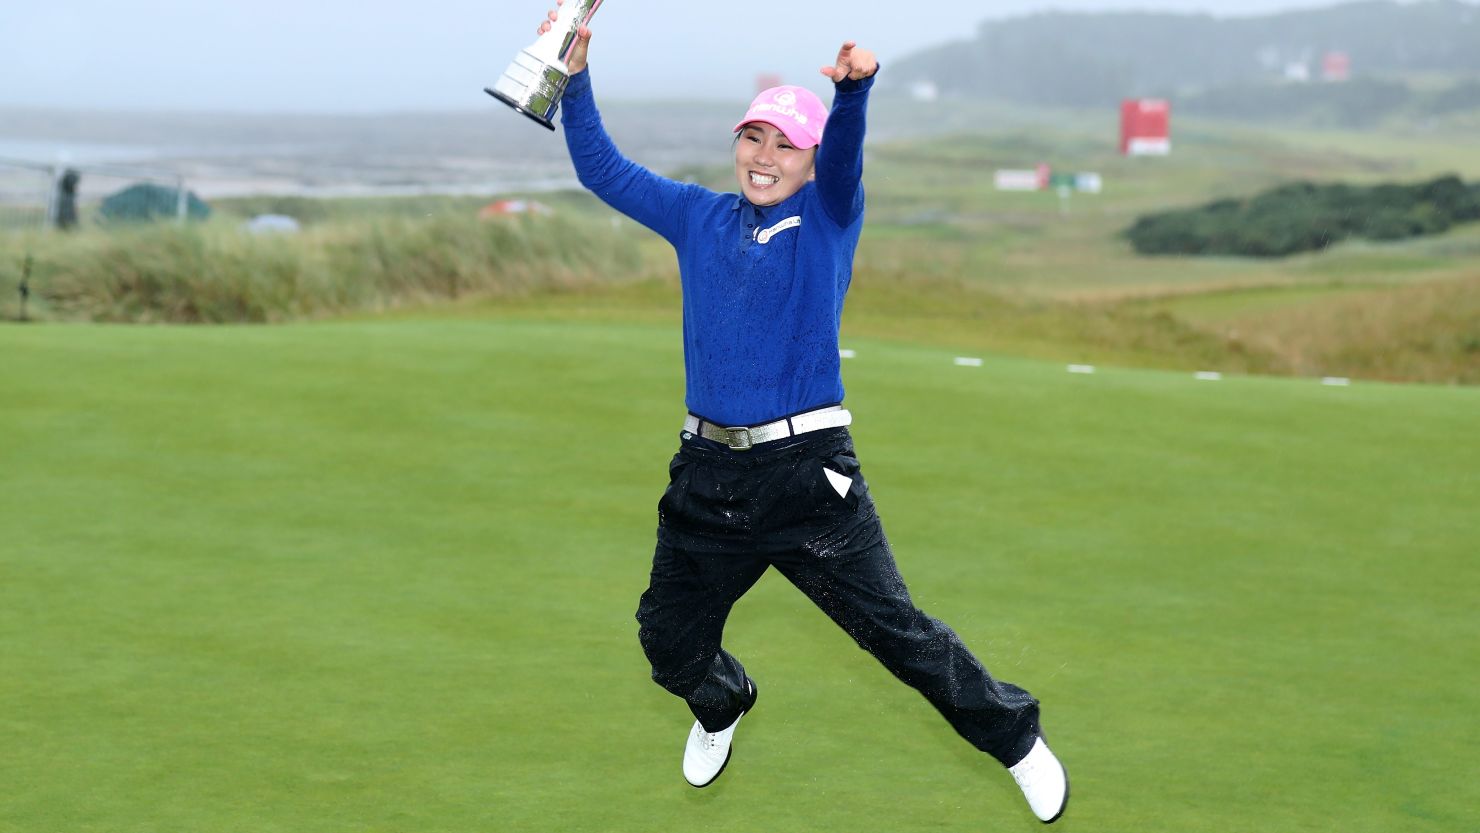 In-Kyung Kim of South Korea holds aloft trophy having won the Women's British Open at Kingsbarns, Scotland